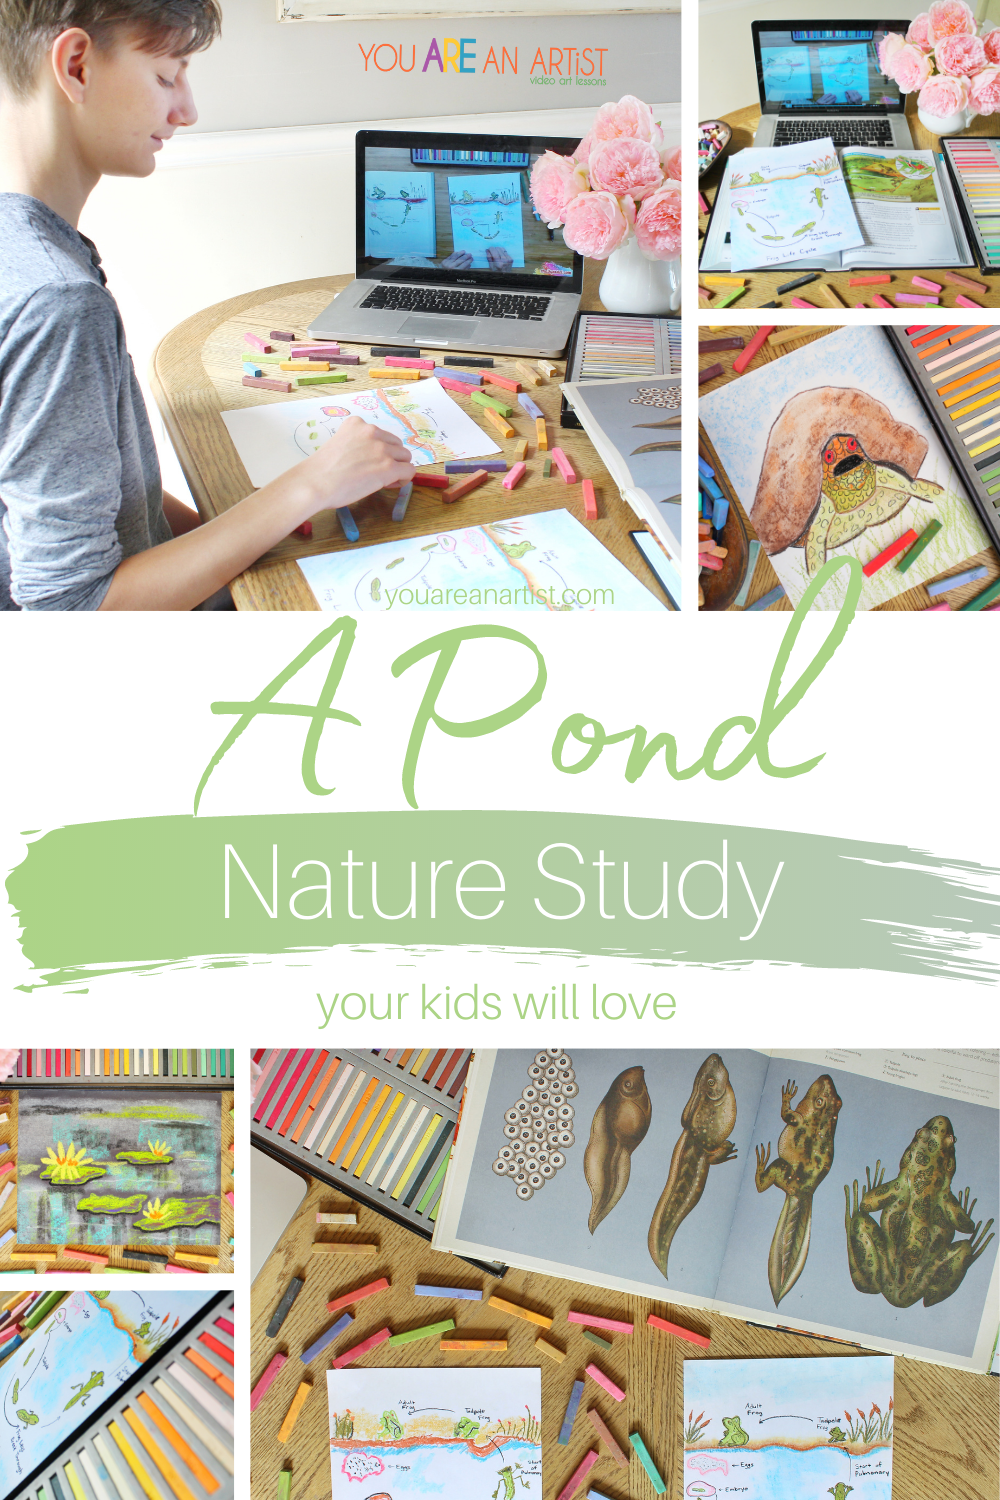 A Pond Nature Study Your Kids Will Love! :Spring and summer are the perfect time to explore a pond nature study! Exploring a local pond can be filled with surprises and wonder, from algae and tadpoles to birds and fish. The educational opportunities are endless. Then, you can come back inside to cool off with the fun and colorful chalk pastel pond lessons! #YouAREAnArtist #pondstudyforkids #pondunitstudy #pondstudy #chalkpastel #videoartlessons